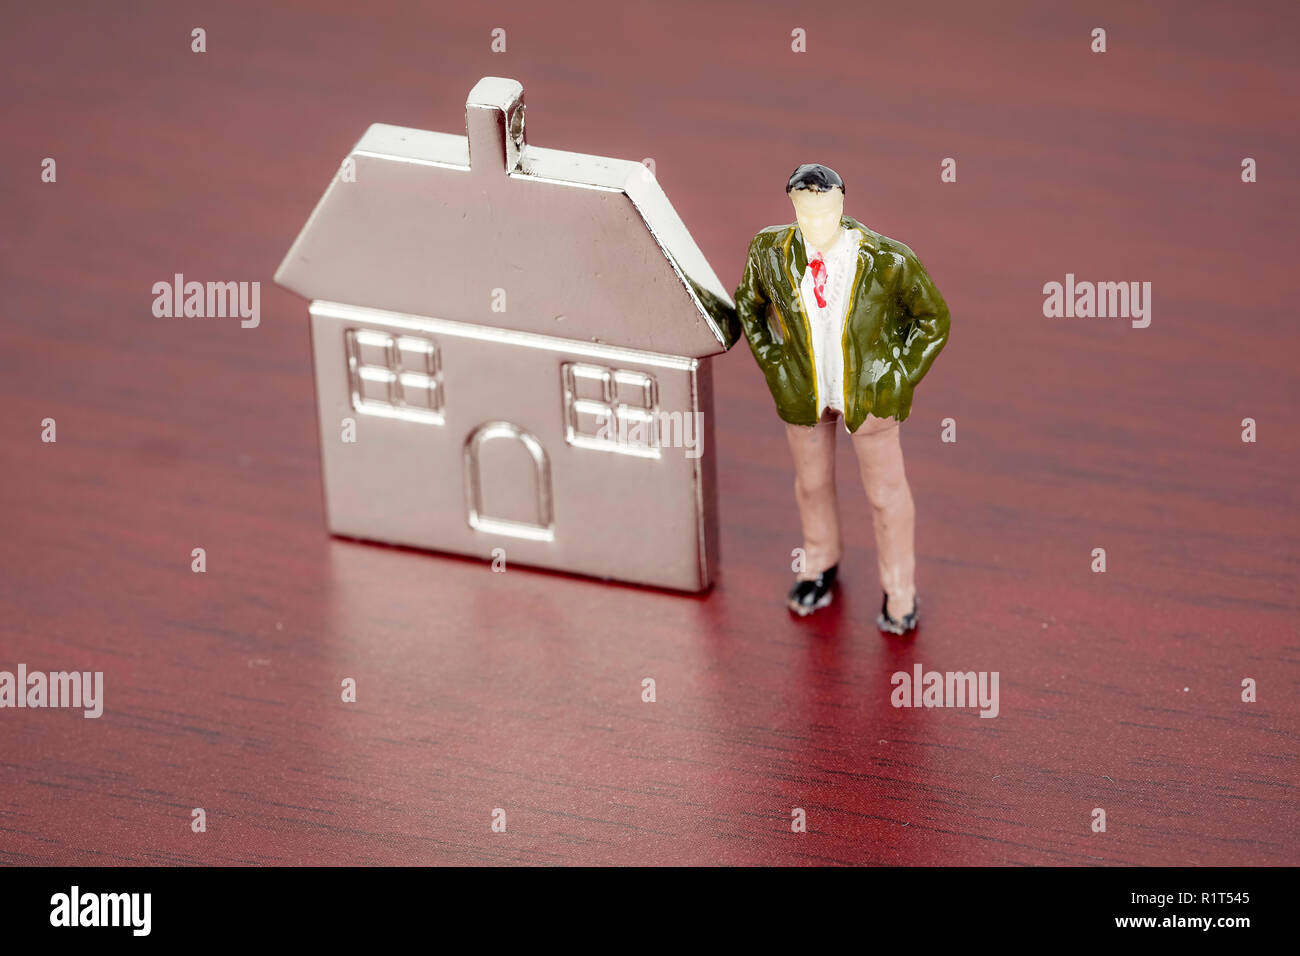 Miniature figure and metal house replica for property investment concept Stock Photo